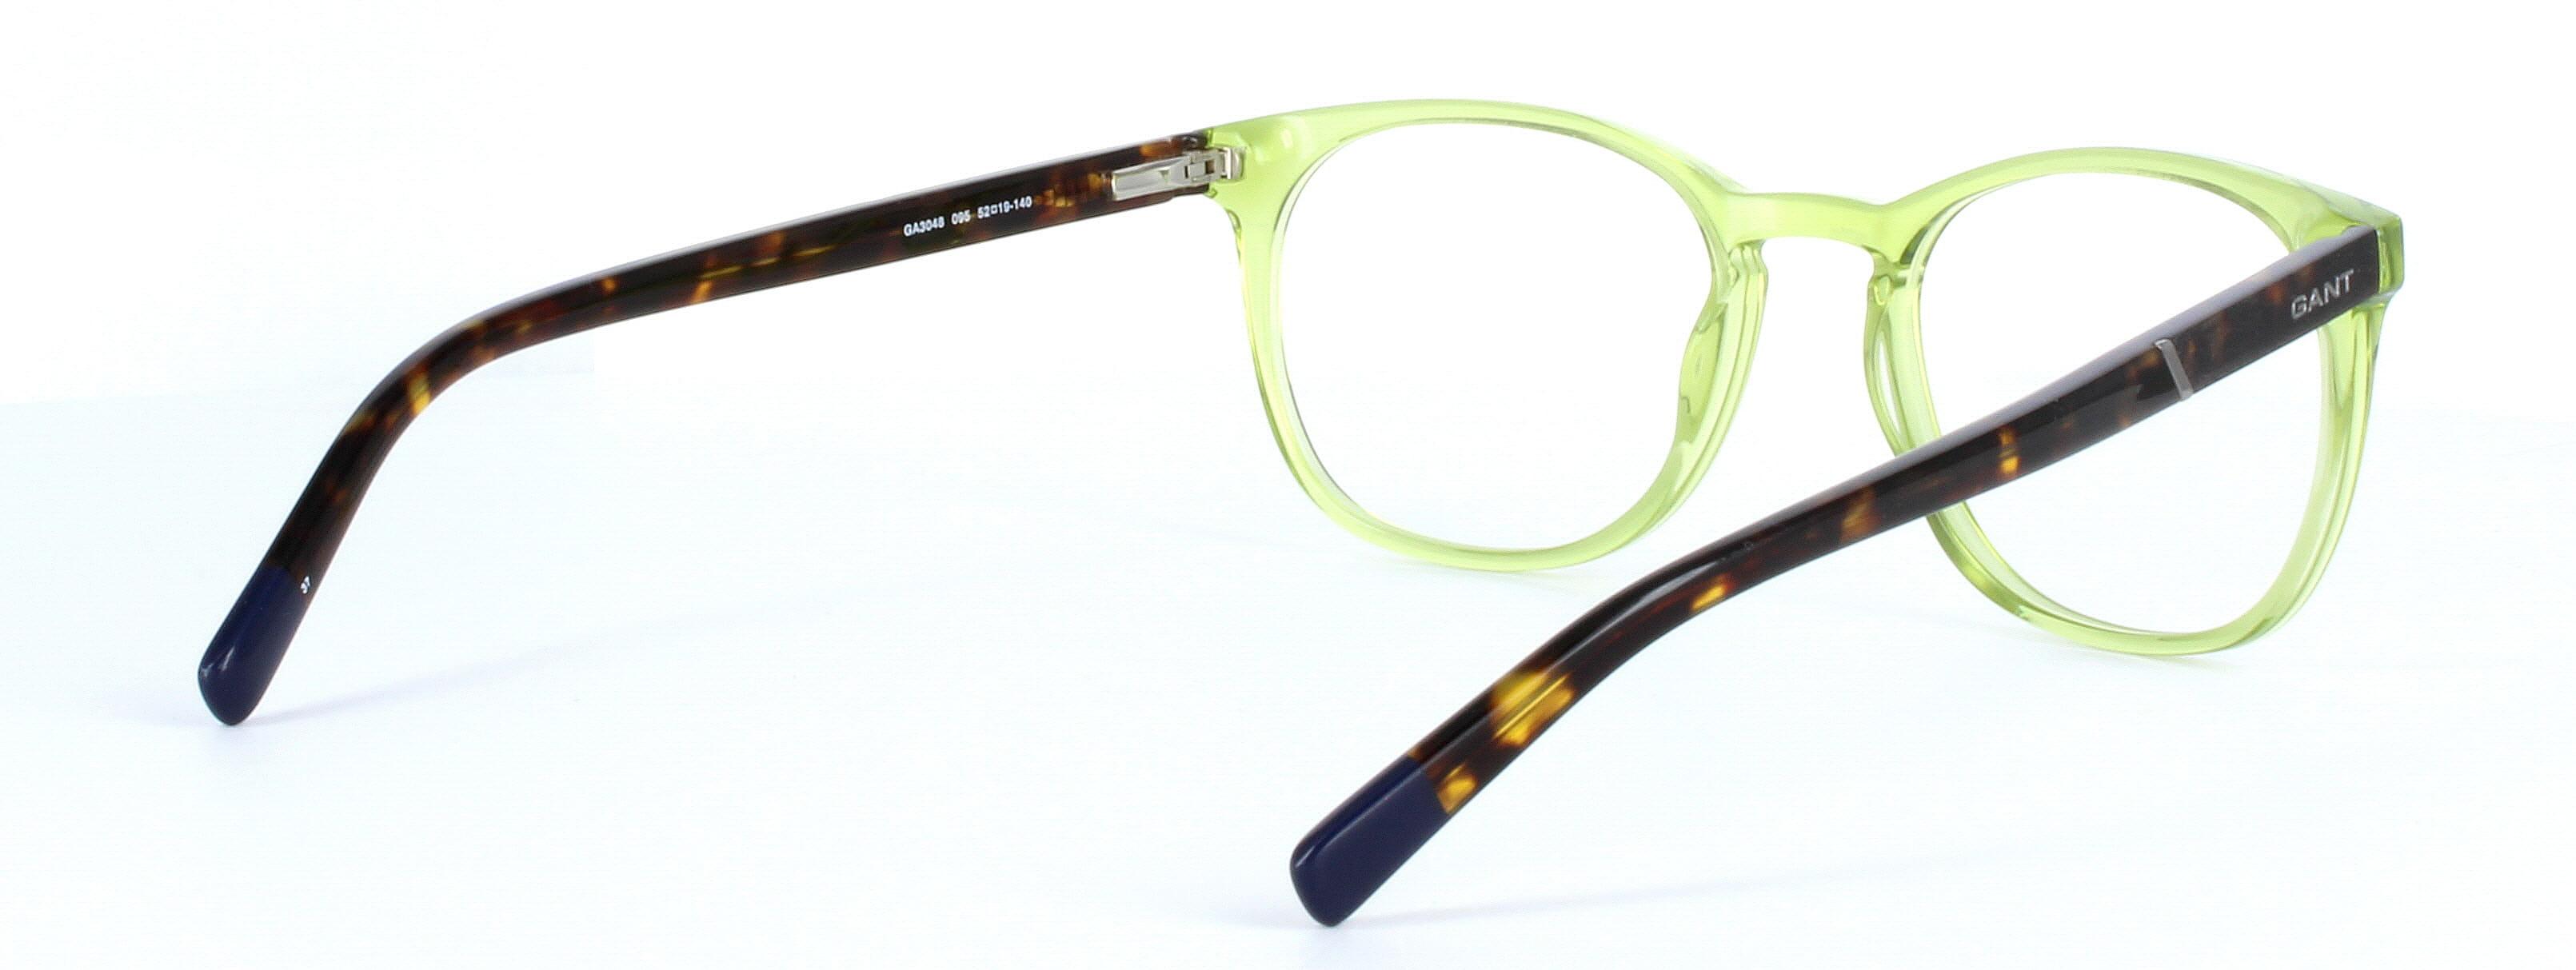 Gant 3048 095 - Ladies hand made acetate that's crystal green at the front and tortoise arms - image view 4